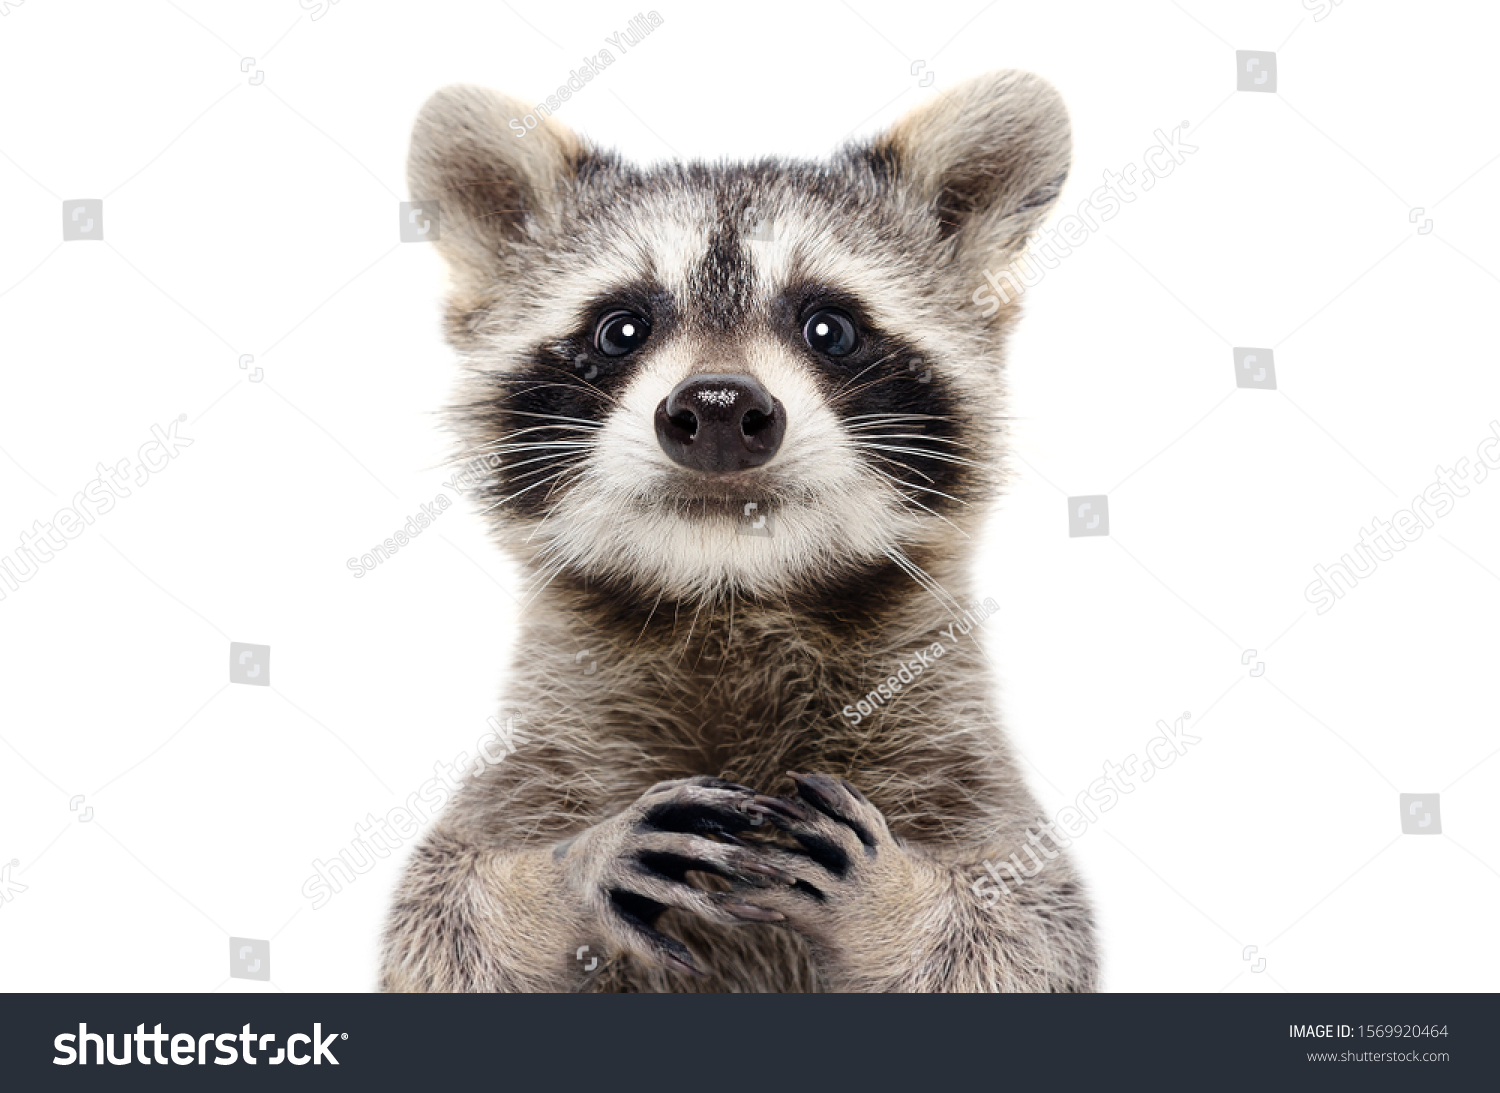 Portrait of a cute funny raccoon, closeup, isolated on a white background #1569920464